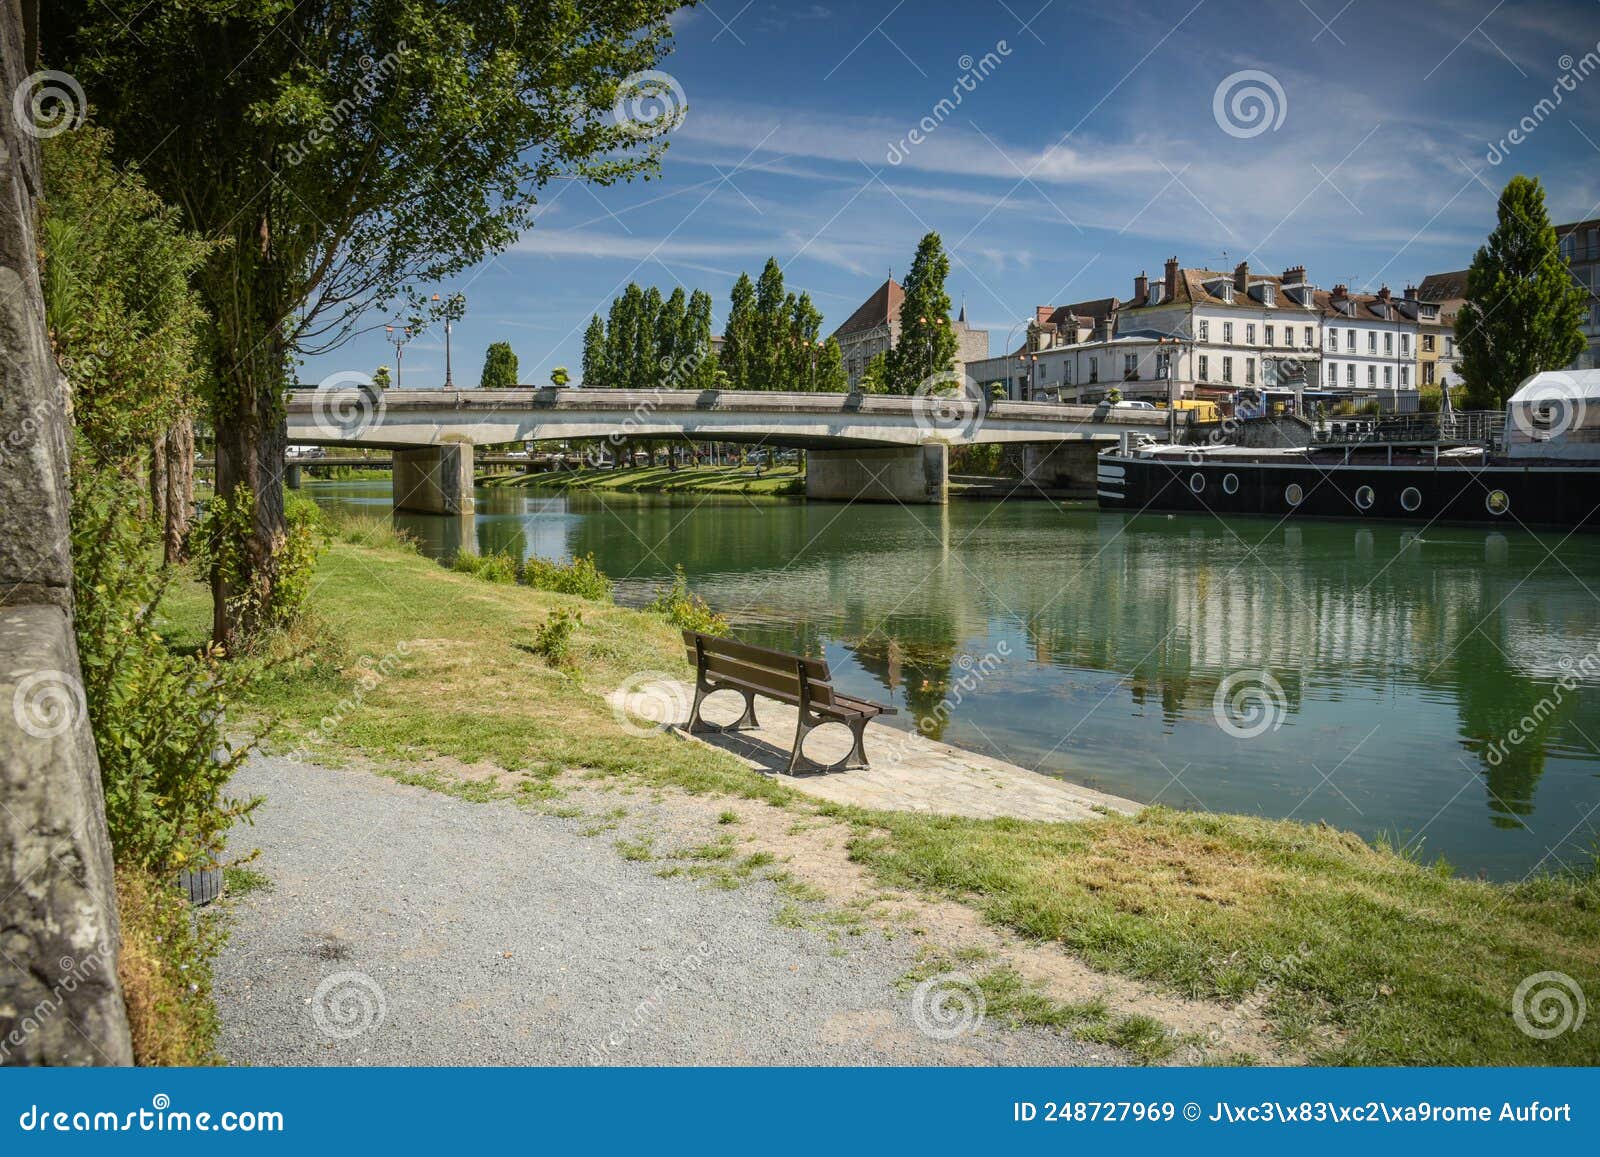 Landscape Photography of the Town of Melun Stock Image - Image of green ...